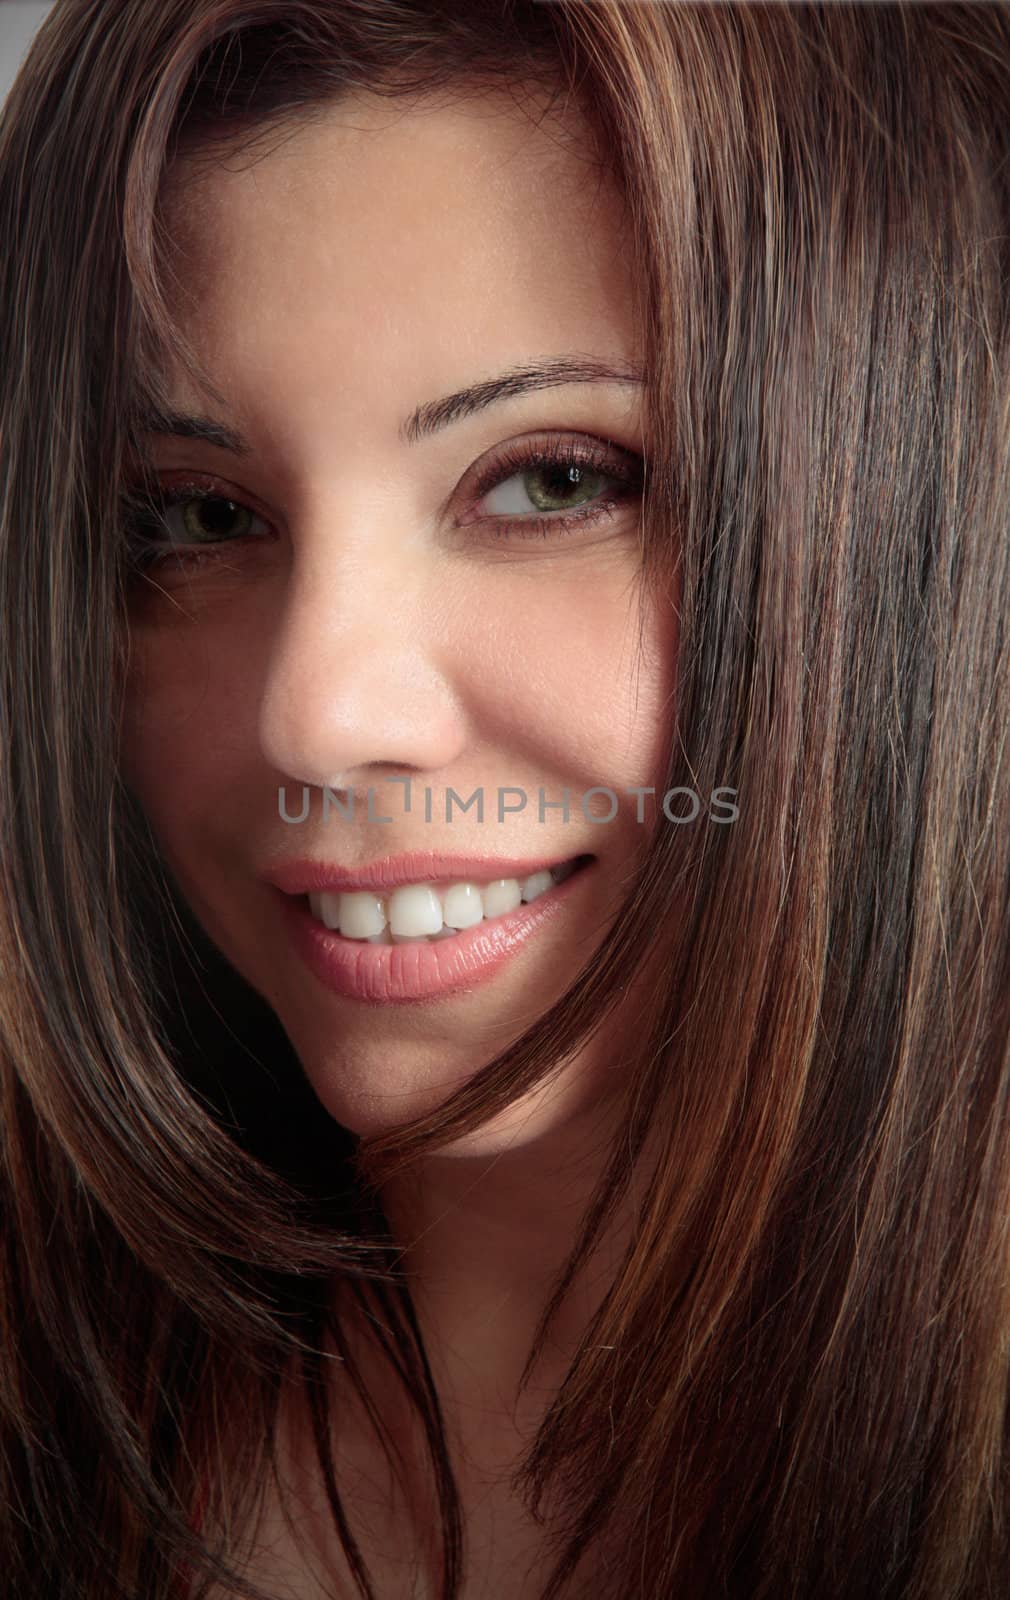 Beautiful woman with long brown hair smiling.